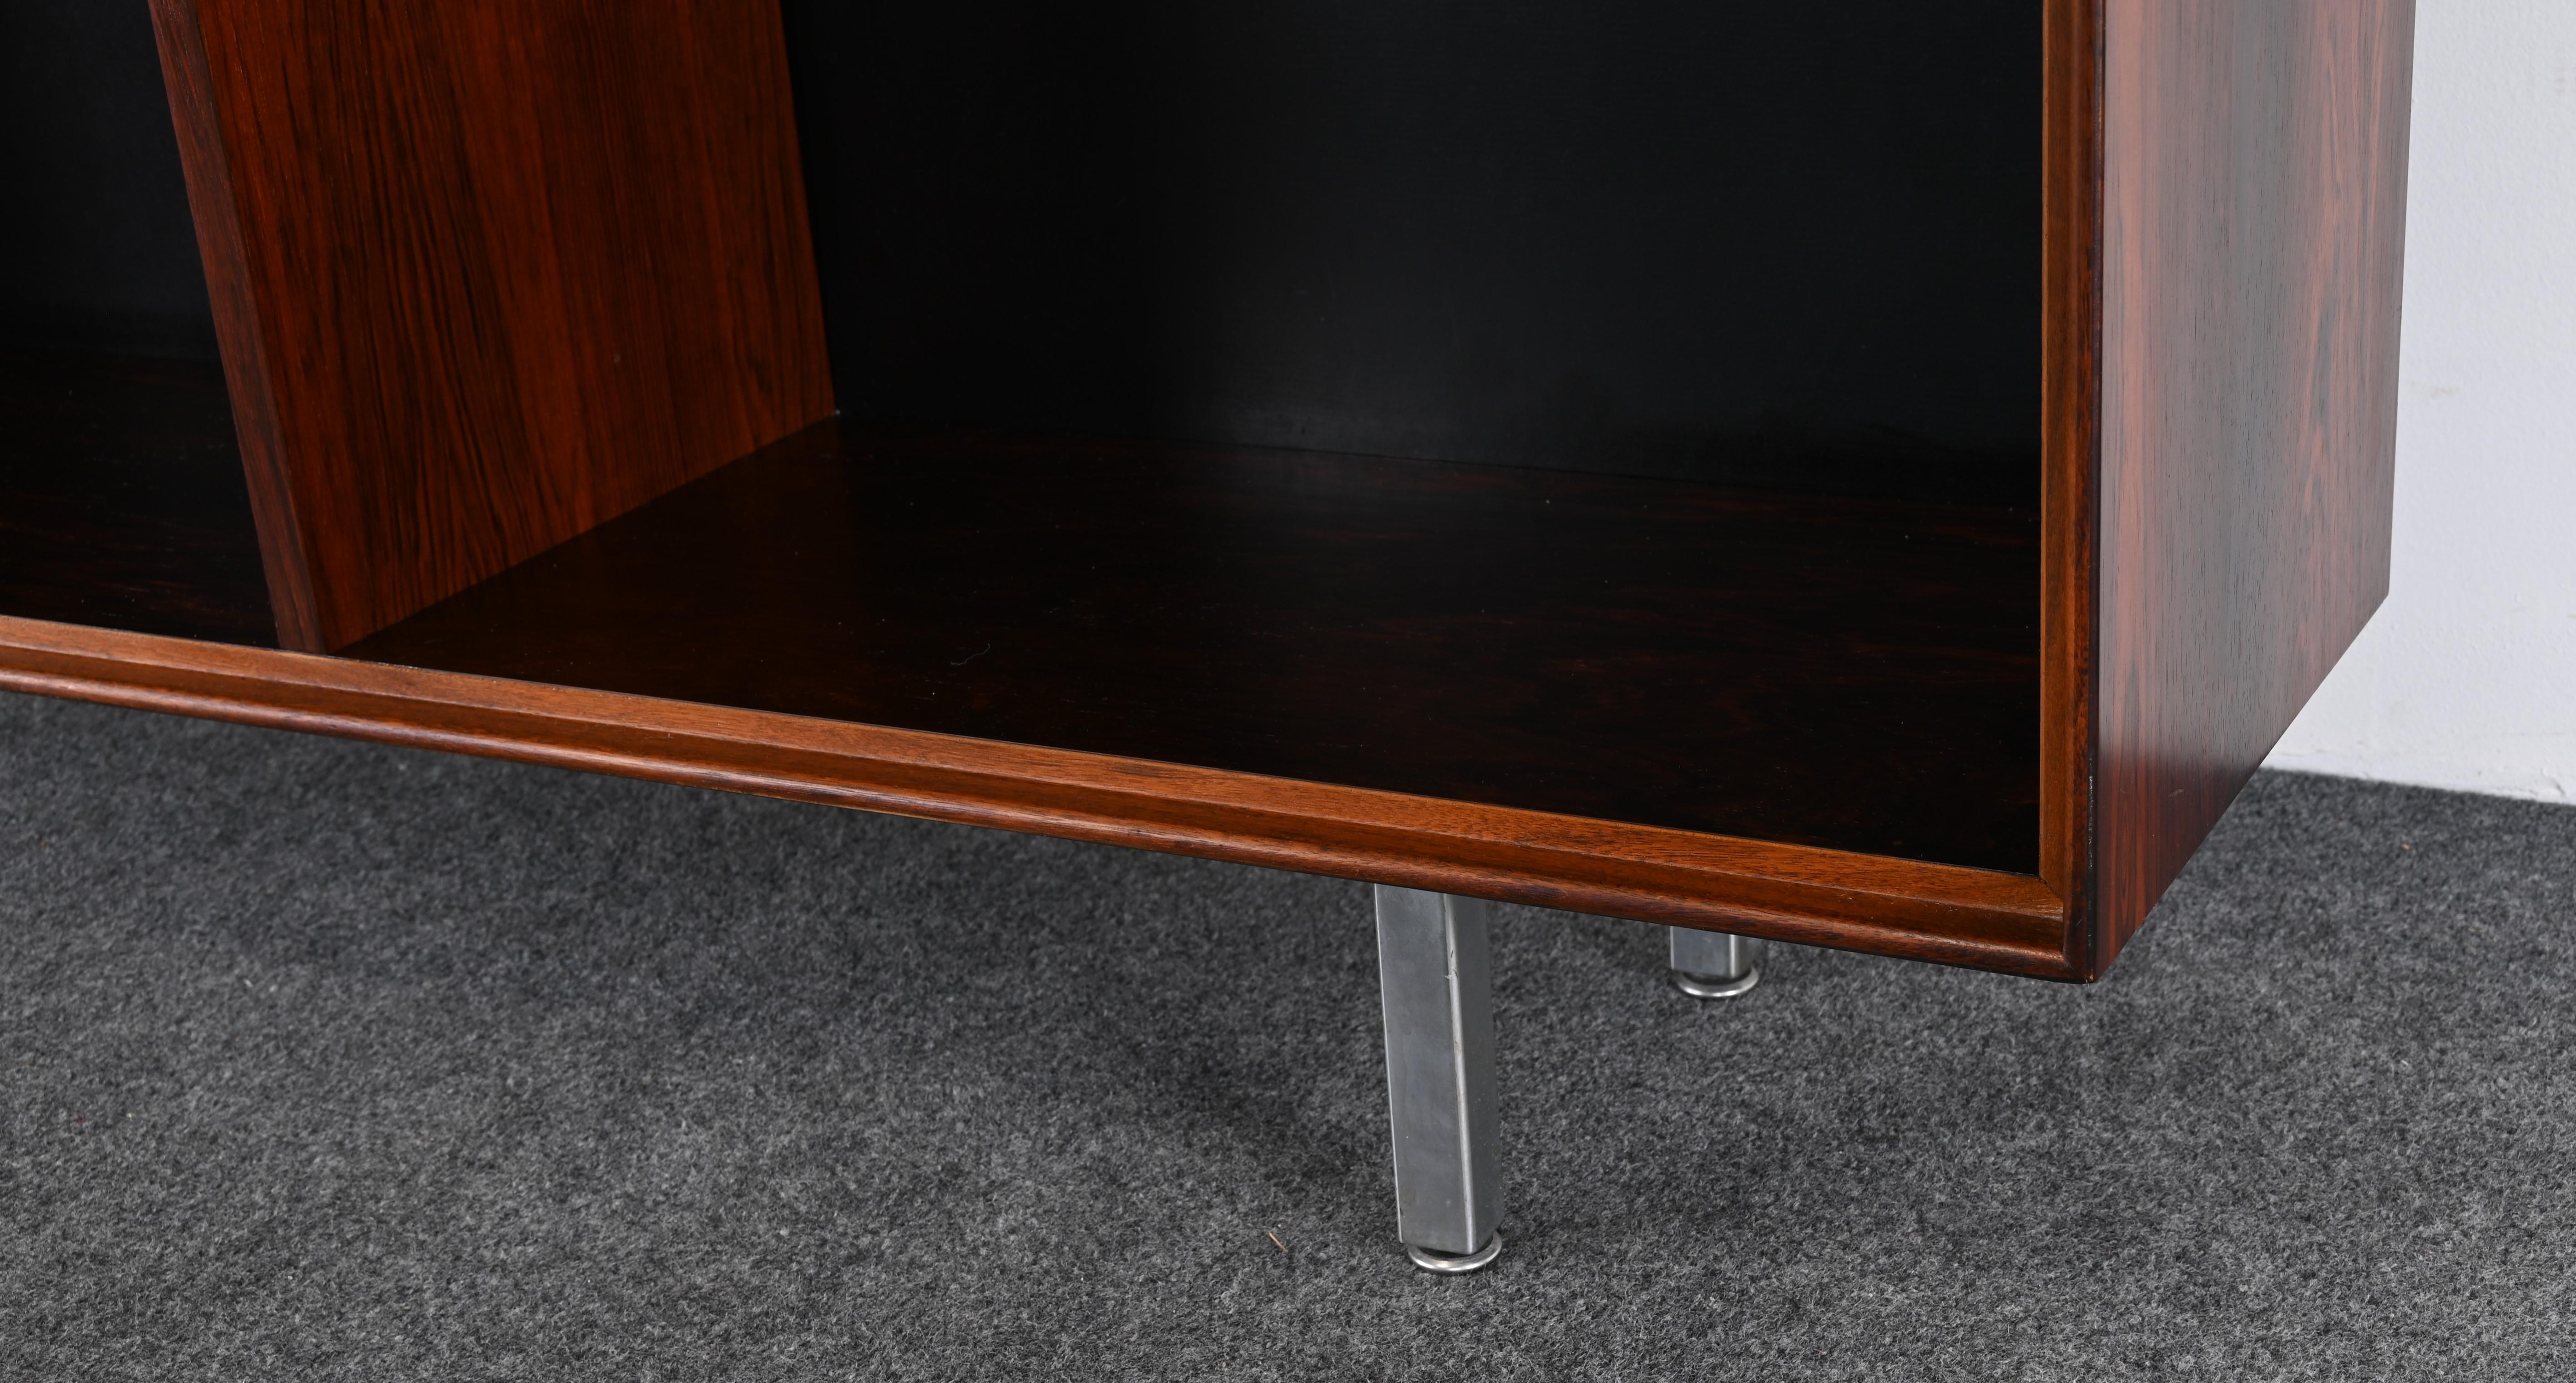 Rosewood Thin Edge Bookshelf by George Nelson for Herman Miller, 1950s For Sale 11